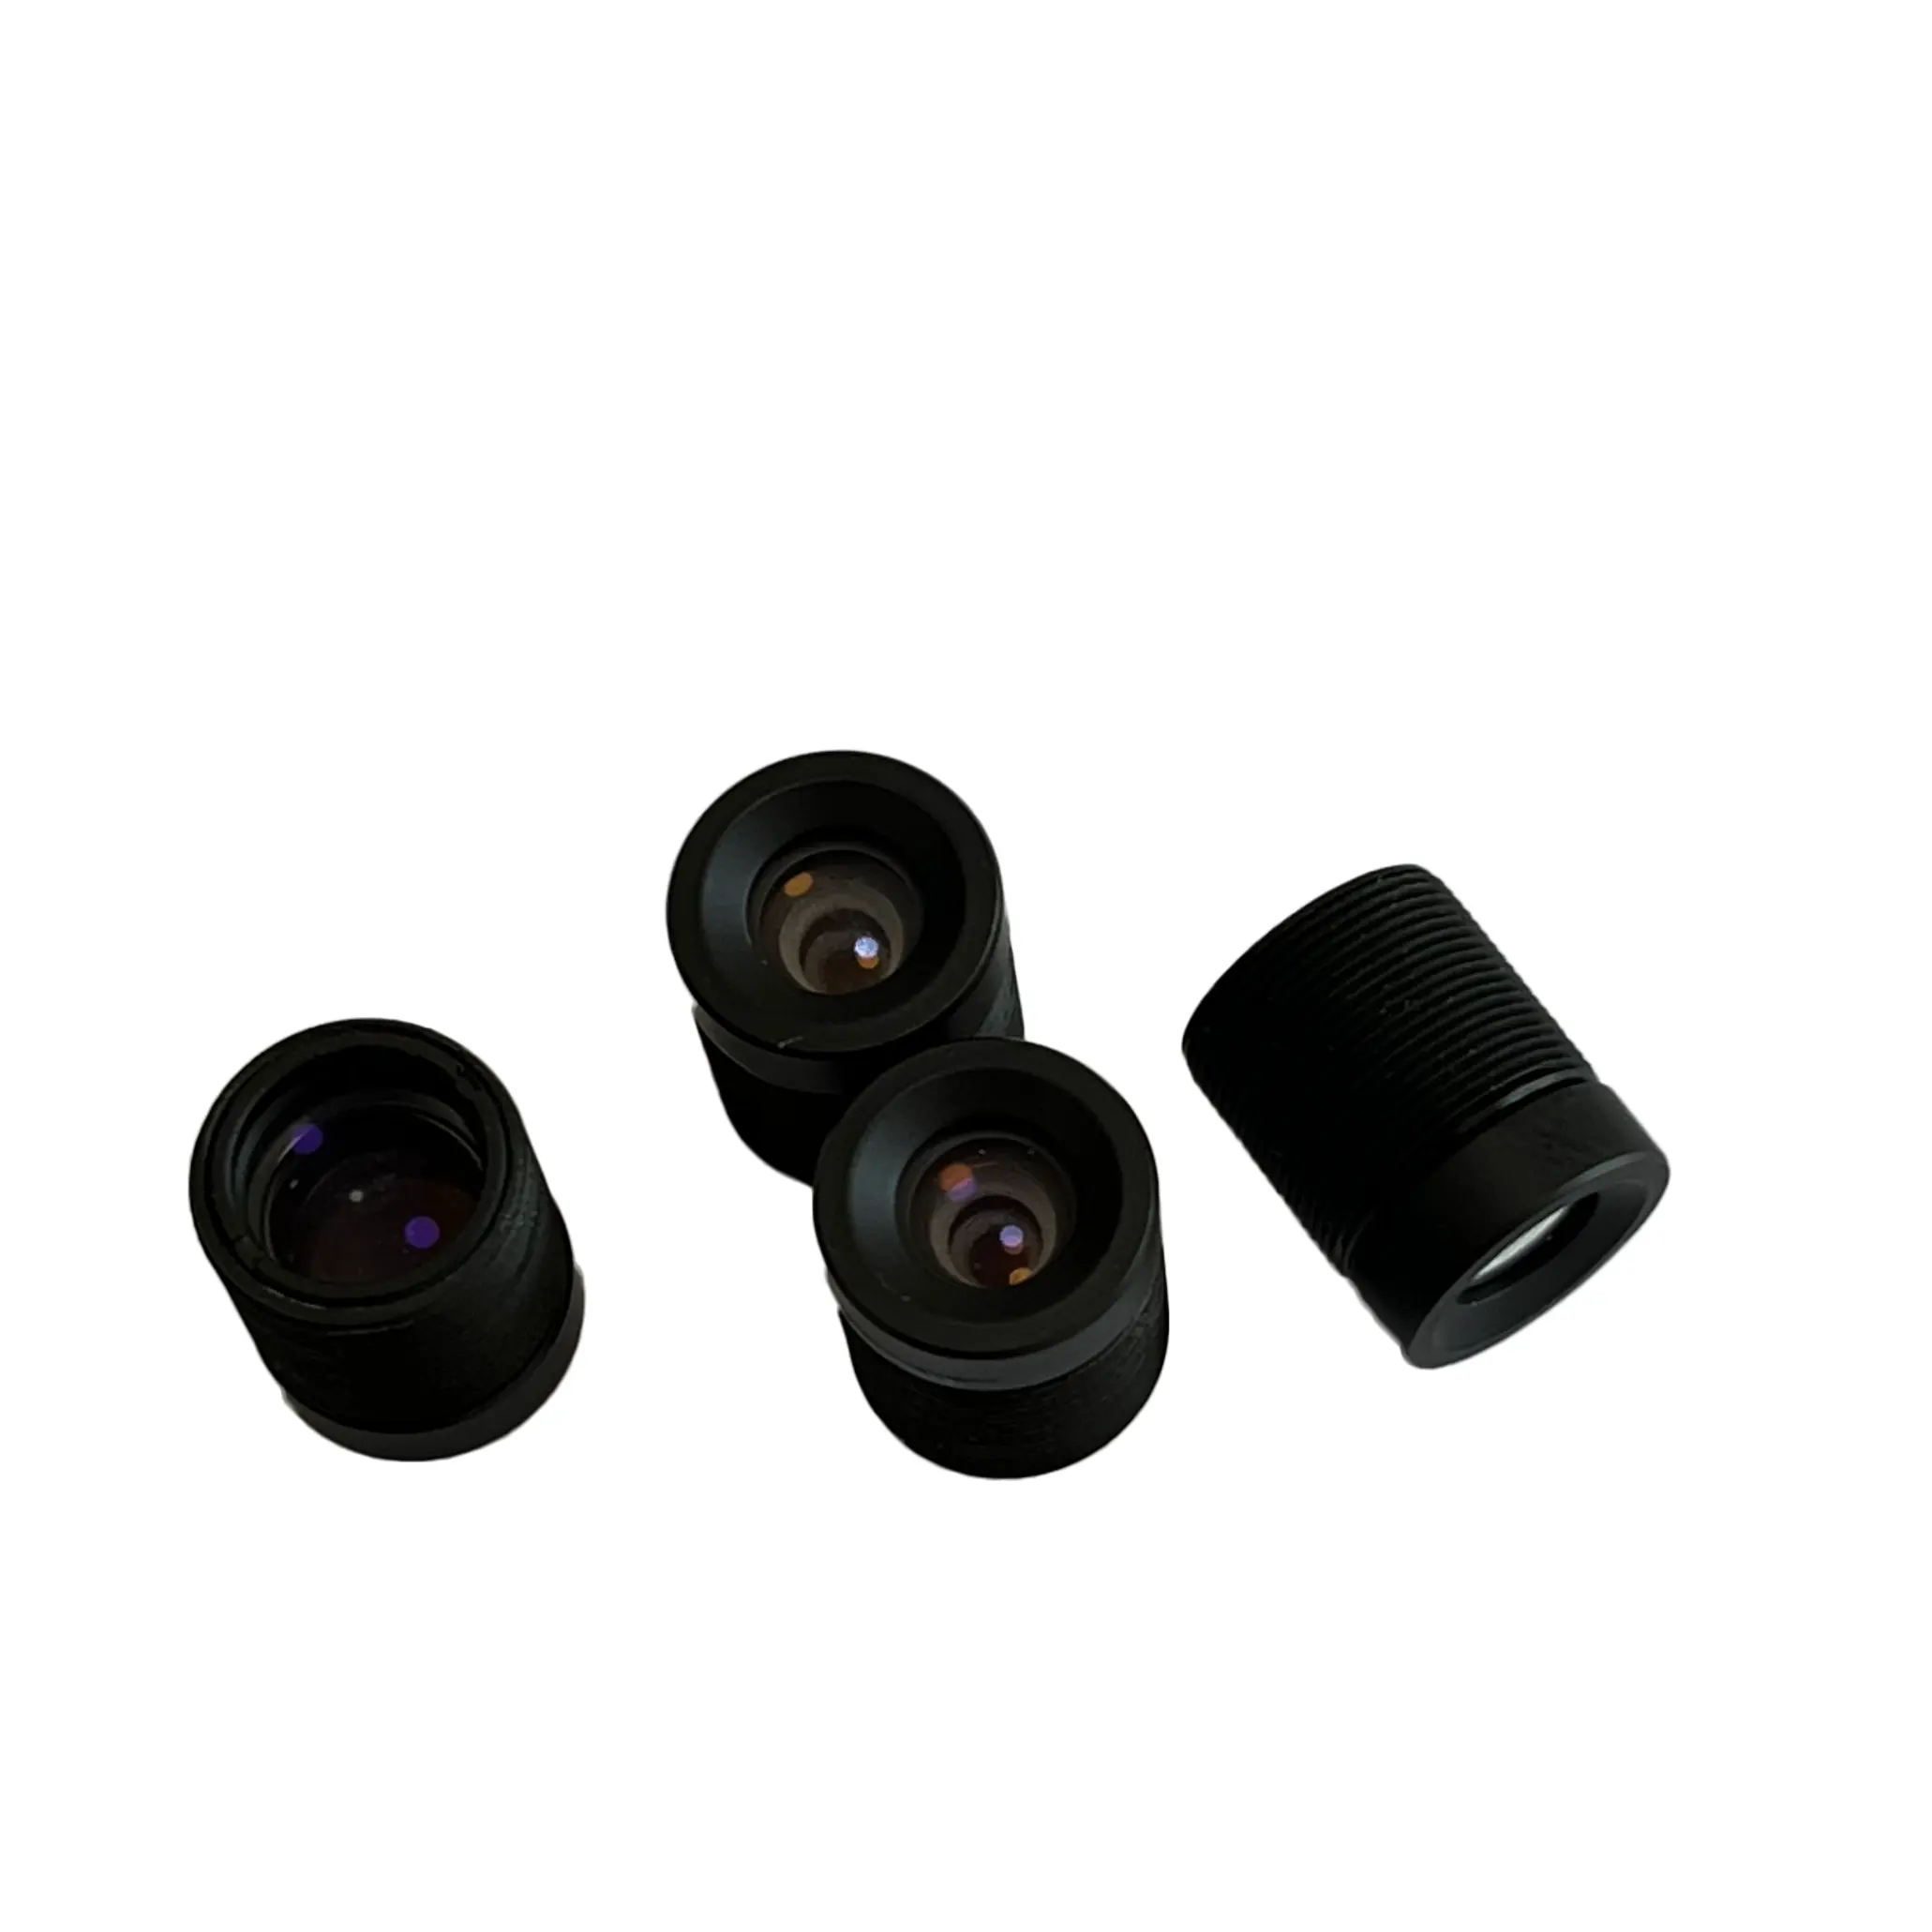 f 8.46 1/3" F7 EFL 8.46 mm wide angle 40 degree cctv lens for ip camera